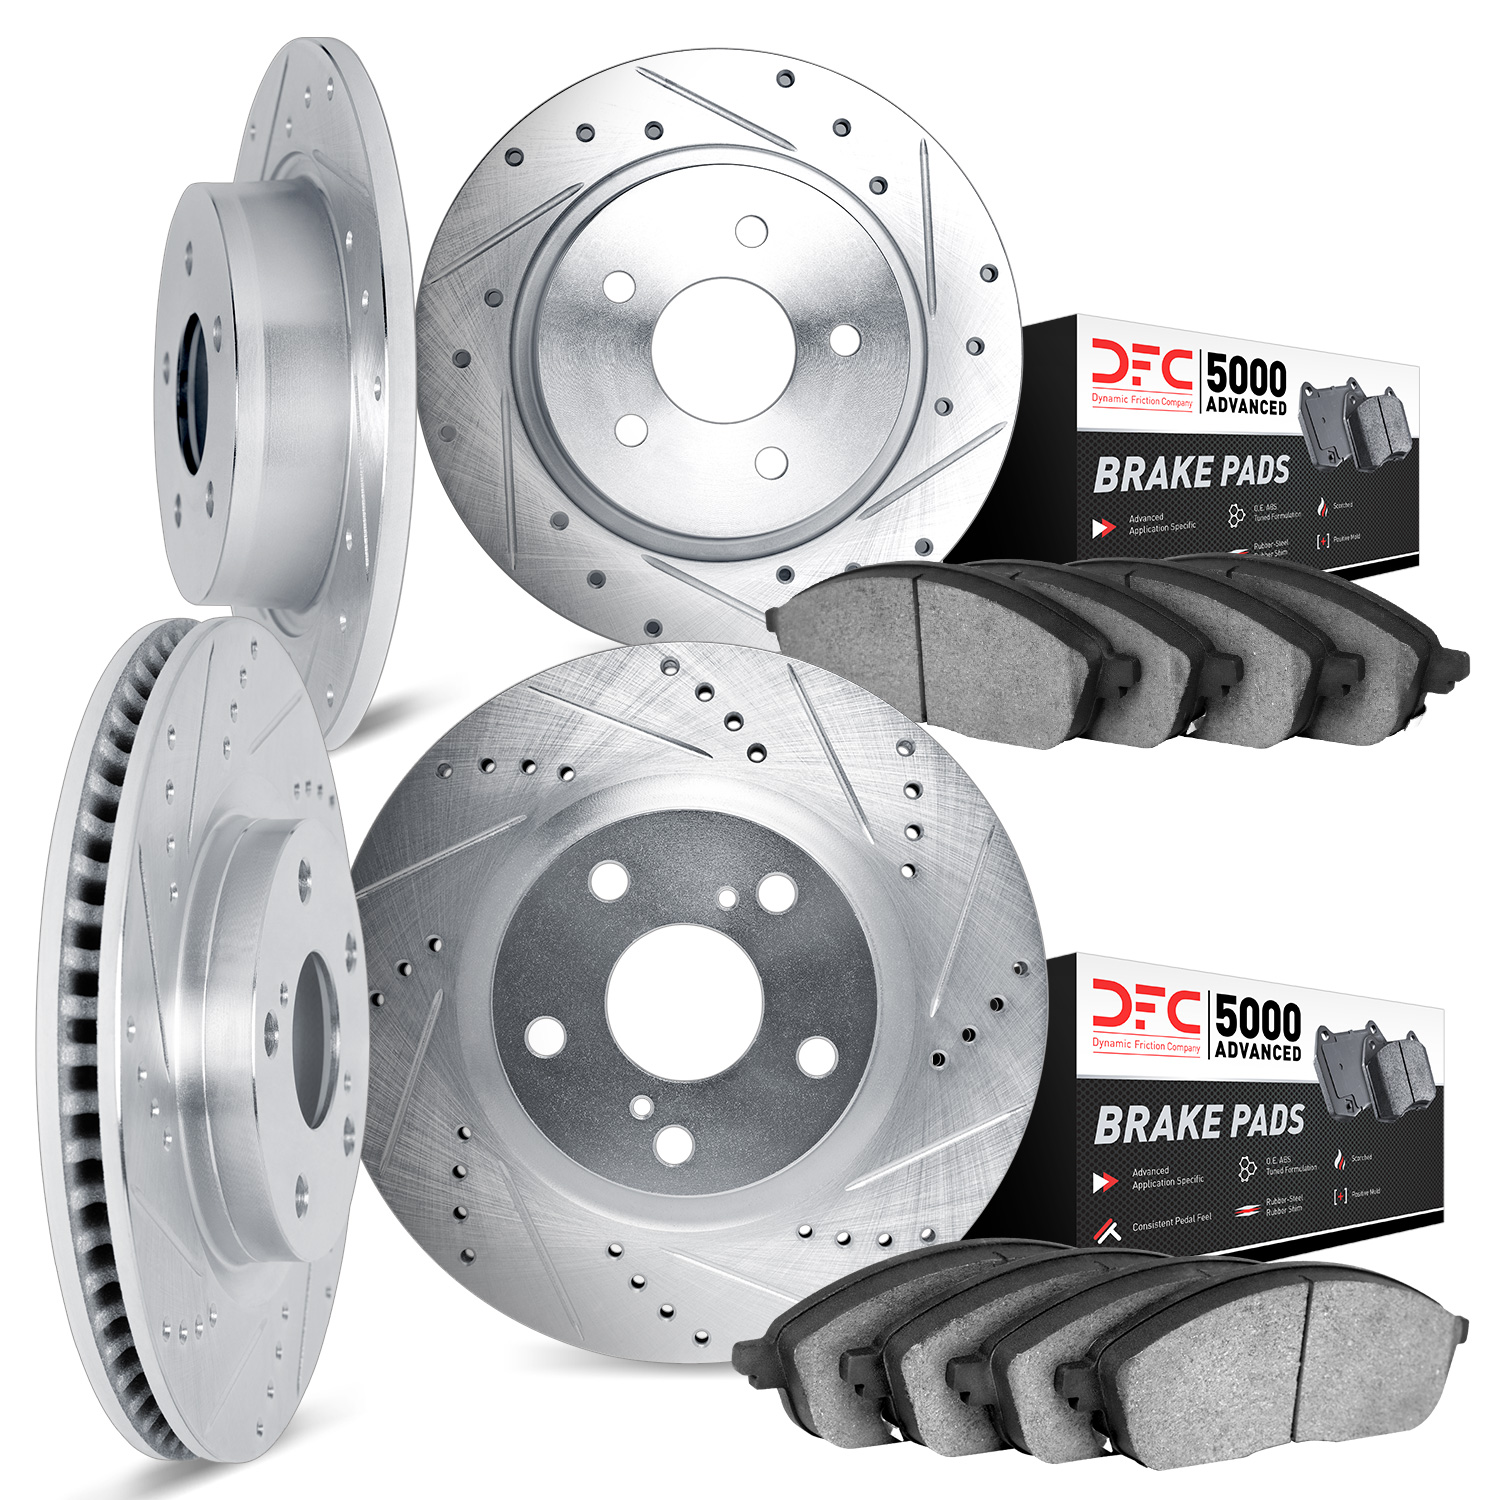 7504-54388 Drilled/Slotted Brake Rotors w/5000 Advanced Brake Pads Kit [Silver], 2015-2019 Ford/Lincoln/Mercury/Mazda, Position: